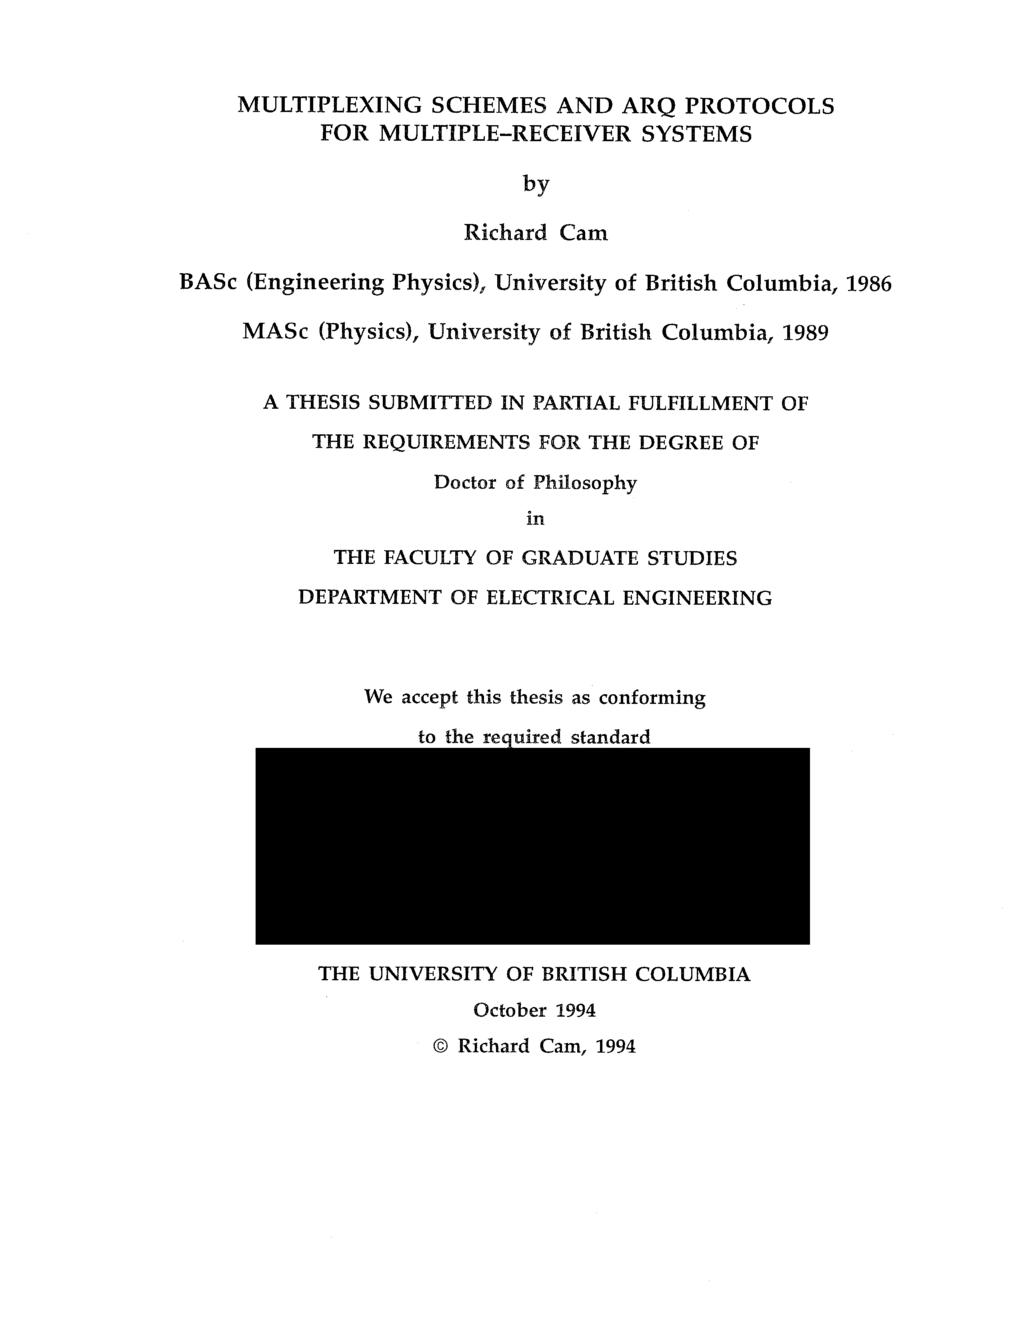 MULTIPLEXING SCHEMES AND ARQ PROTOCOLS FOR MULTIPLE-RECEIVER SYSTEMS by Richard Cam BASc (Engineering Physics), University of British Columbia, 1986 MASc (Physics), University of British Columbia,